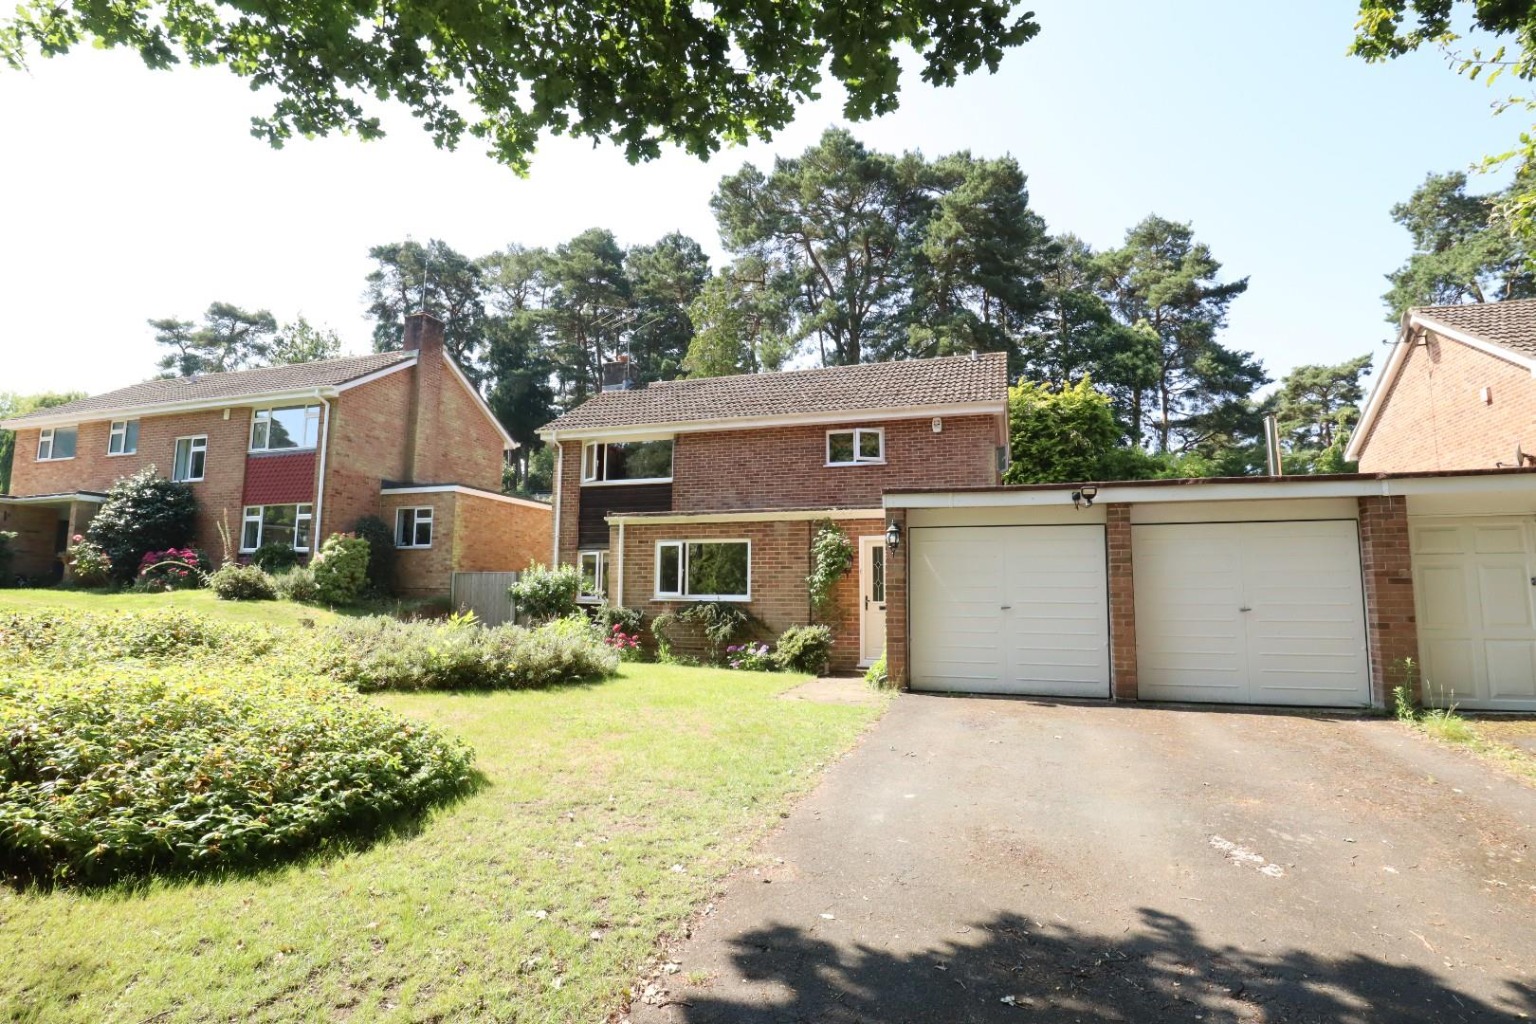 This three/four bedroom family home is located in a cul-de-sac on the sought-after Copped Hall development in Camberley.  Currently the property offers flexible accommodation downstairs with 3 reception rooms, one of which could become a fourth.